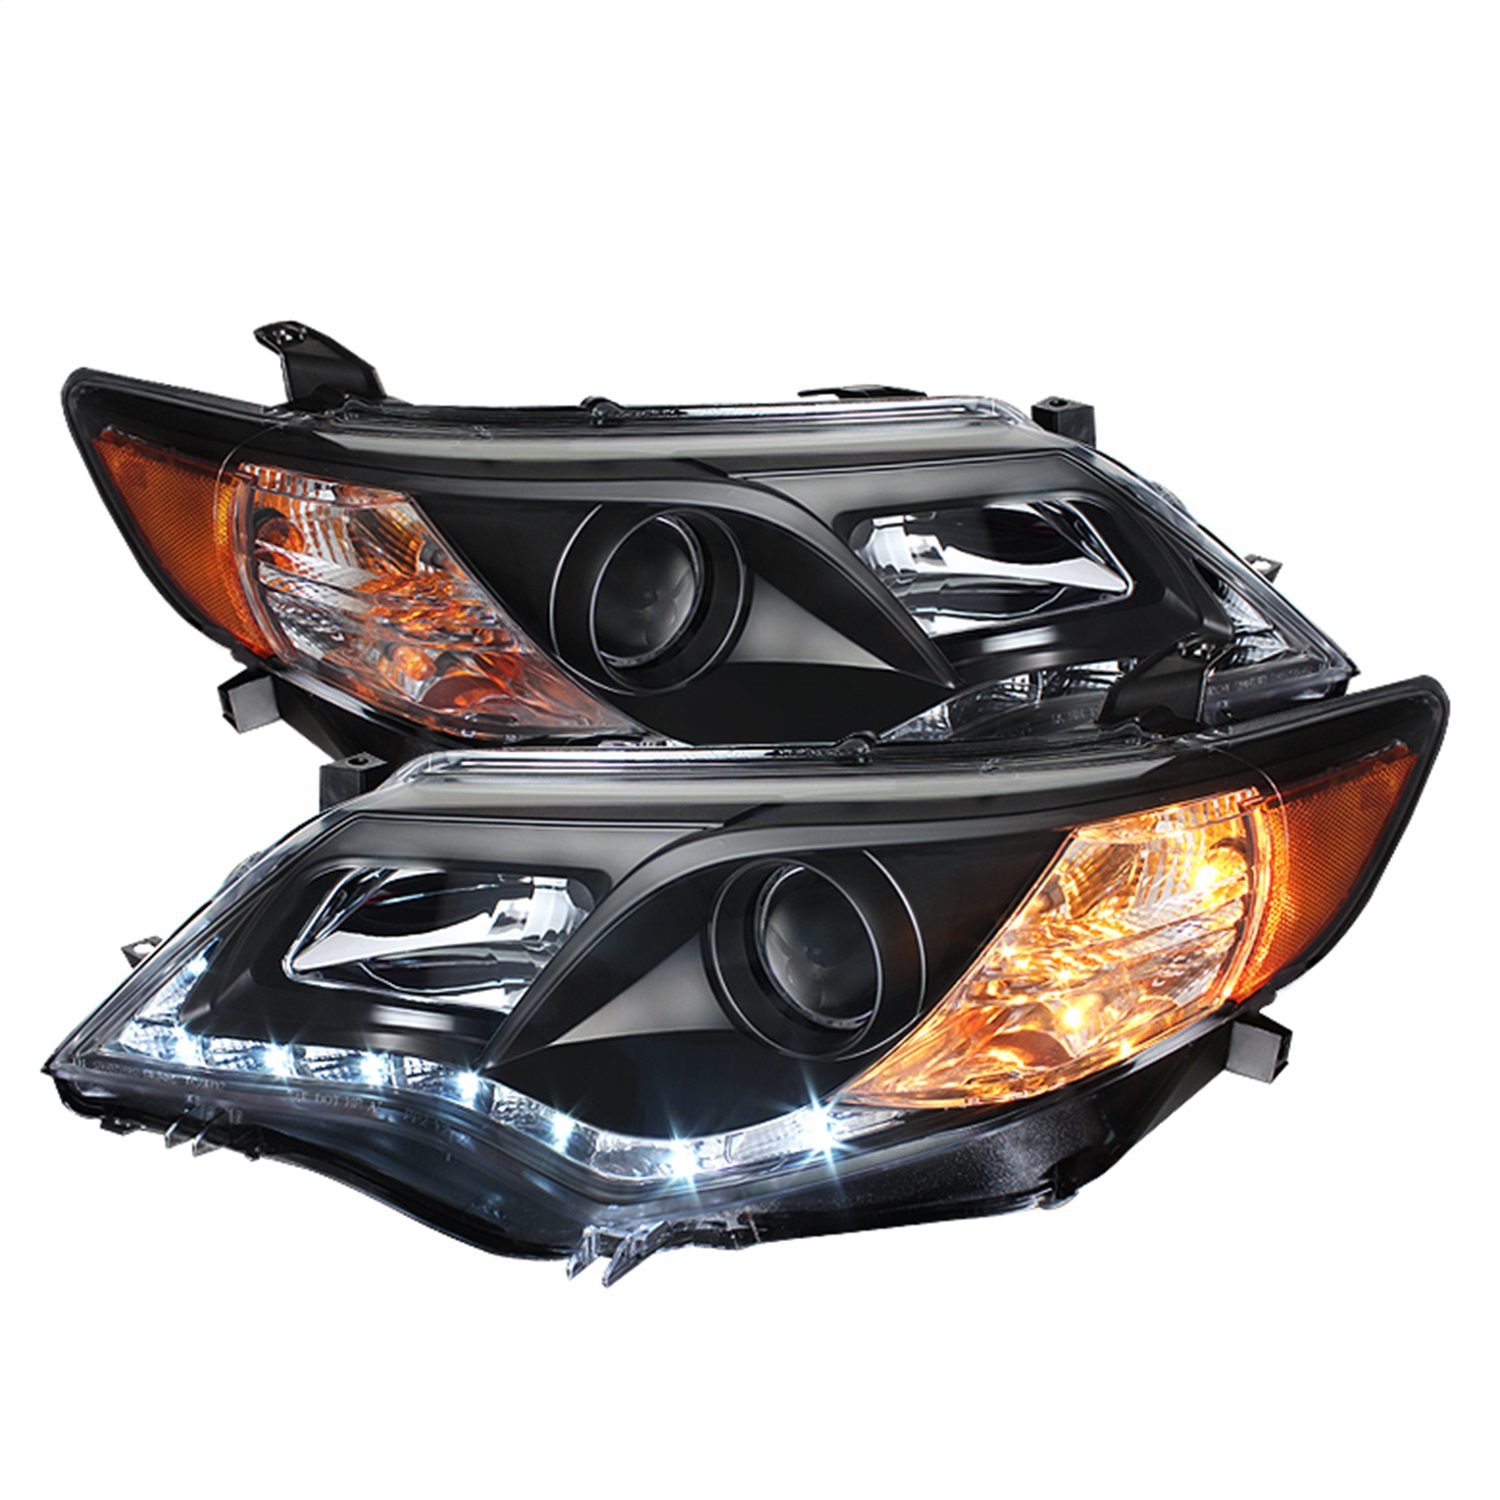 Spyder Auto 5072658 DRL Projector Headlights Fits 12-14 Camry